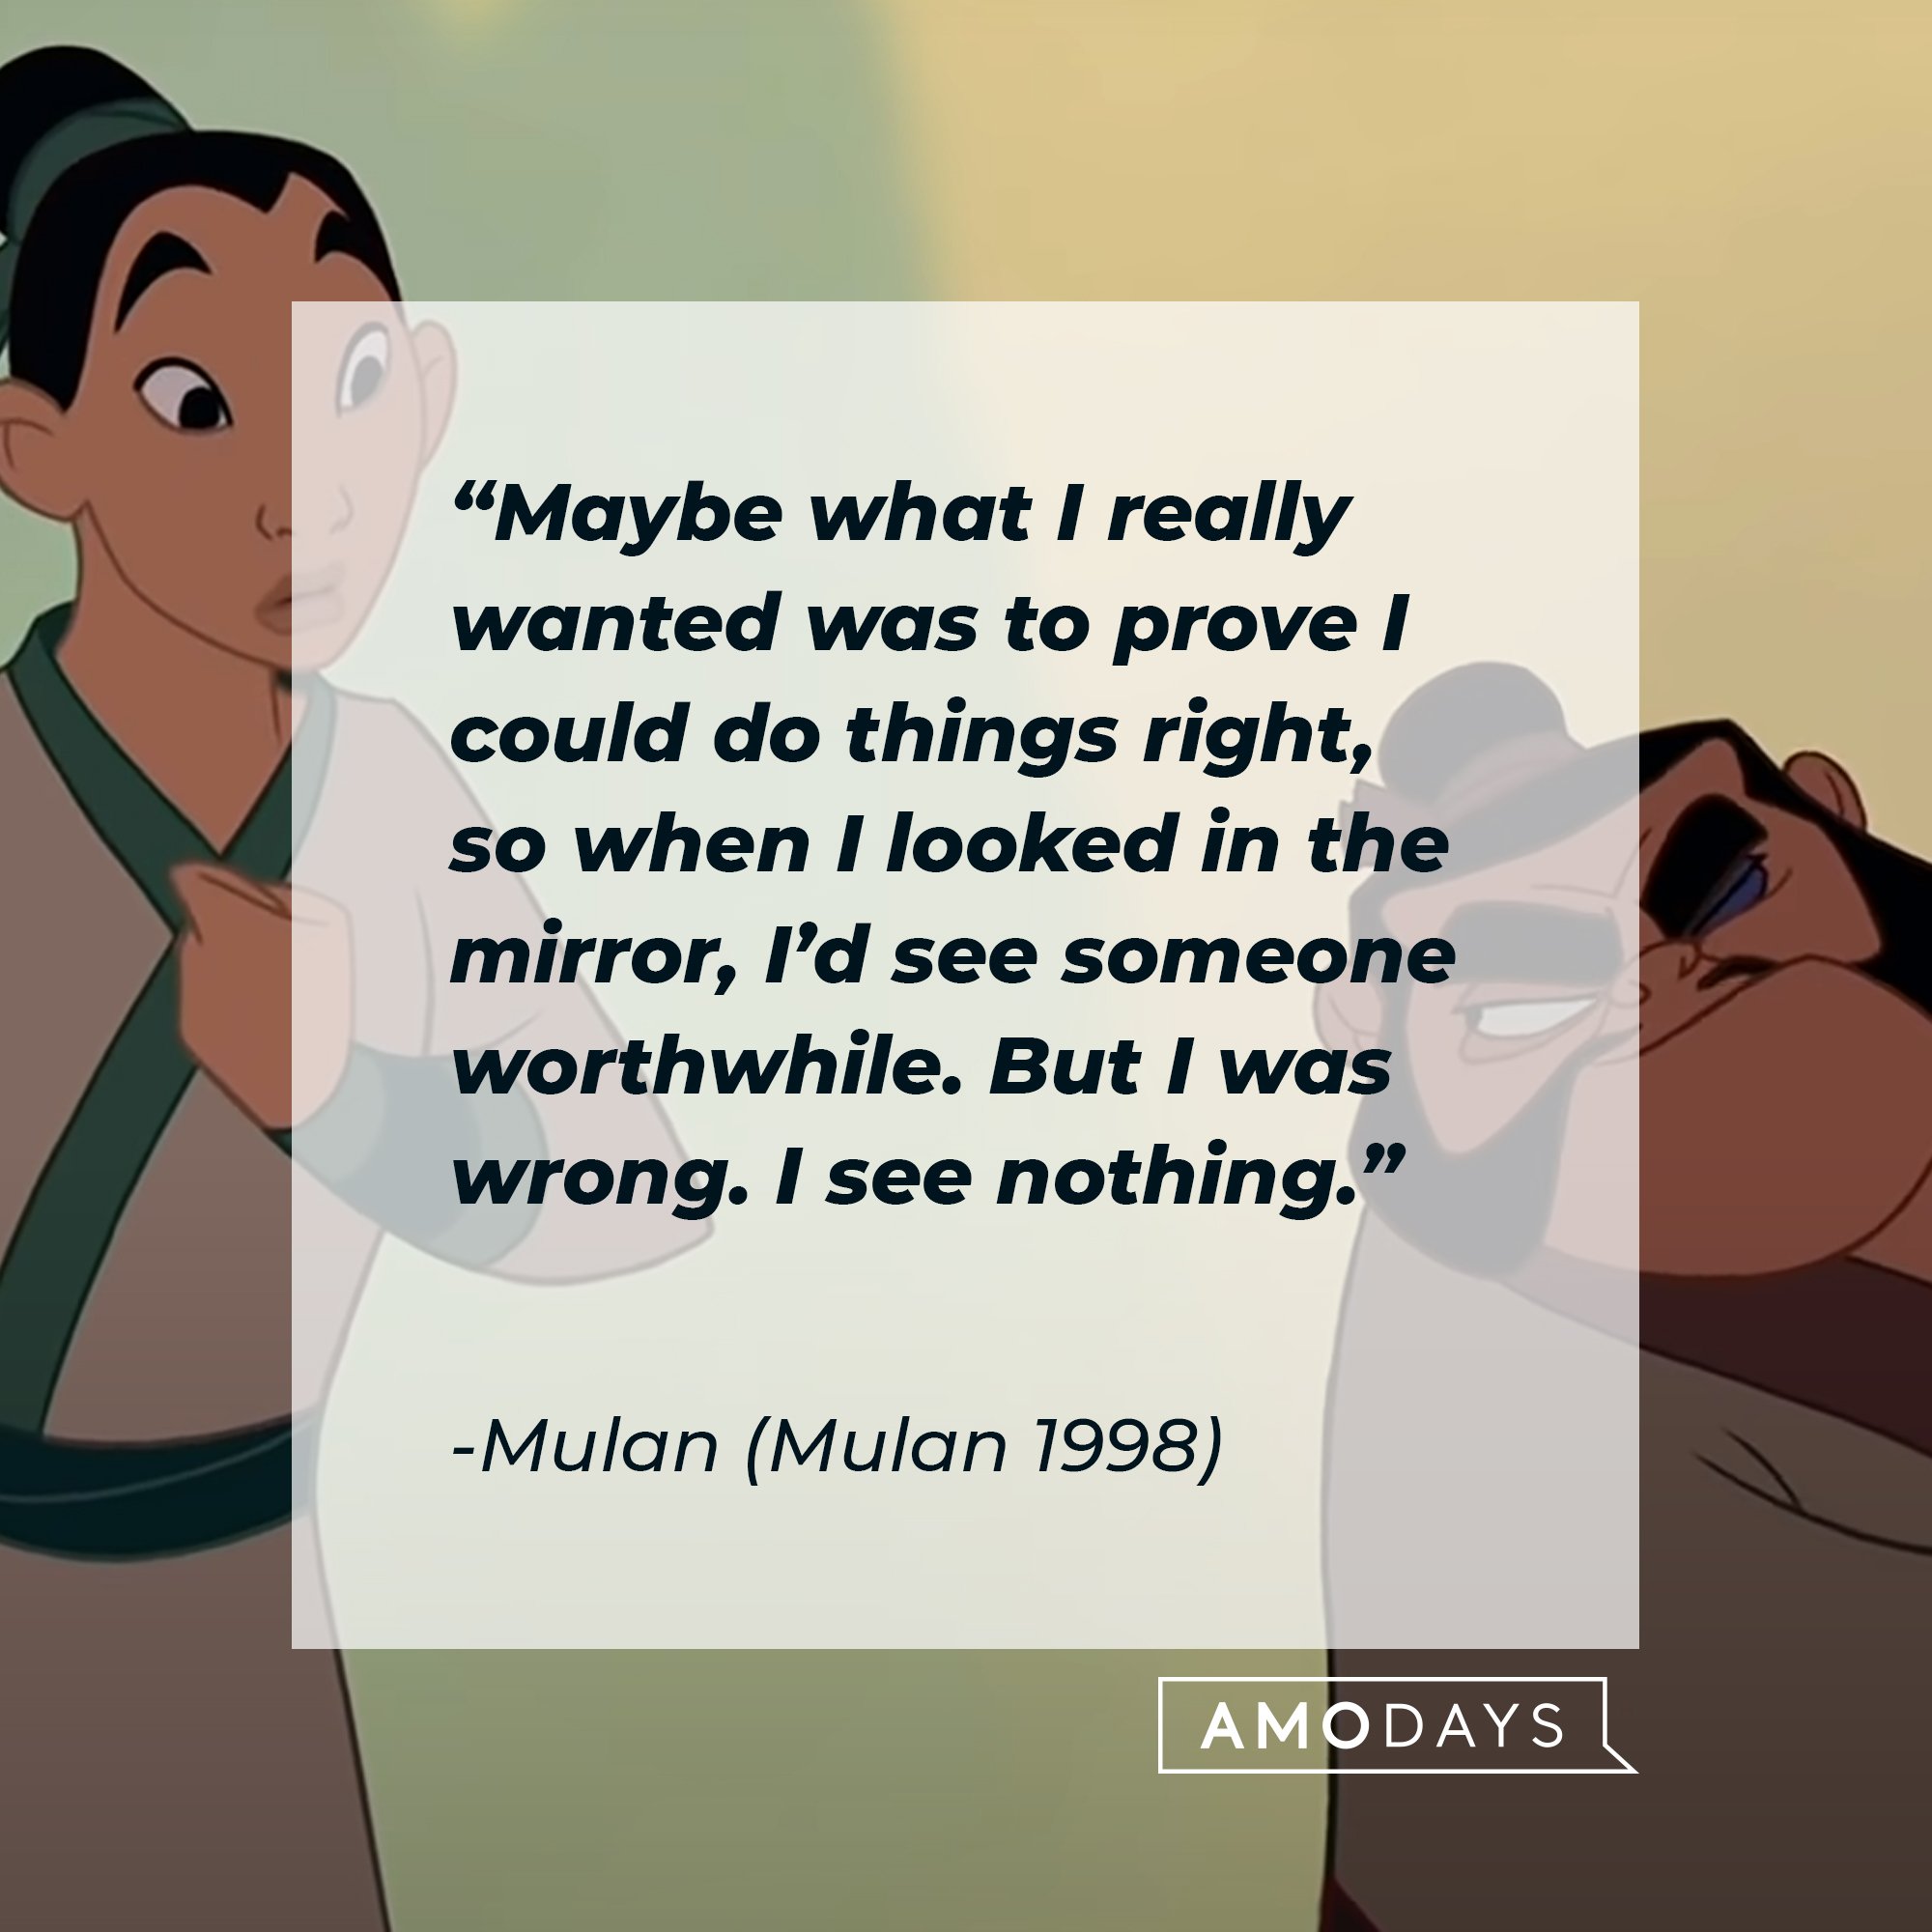   Mulan’s quote: Maybe what I really wanted was to prove I could do things right, so when I looked in the mirror, I’d see someone worthwhile. But I was wrong. I see nothing.” | Image: AmoDays